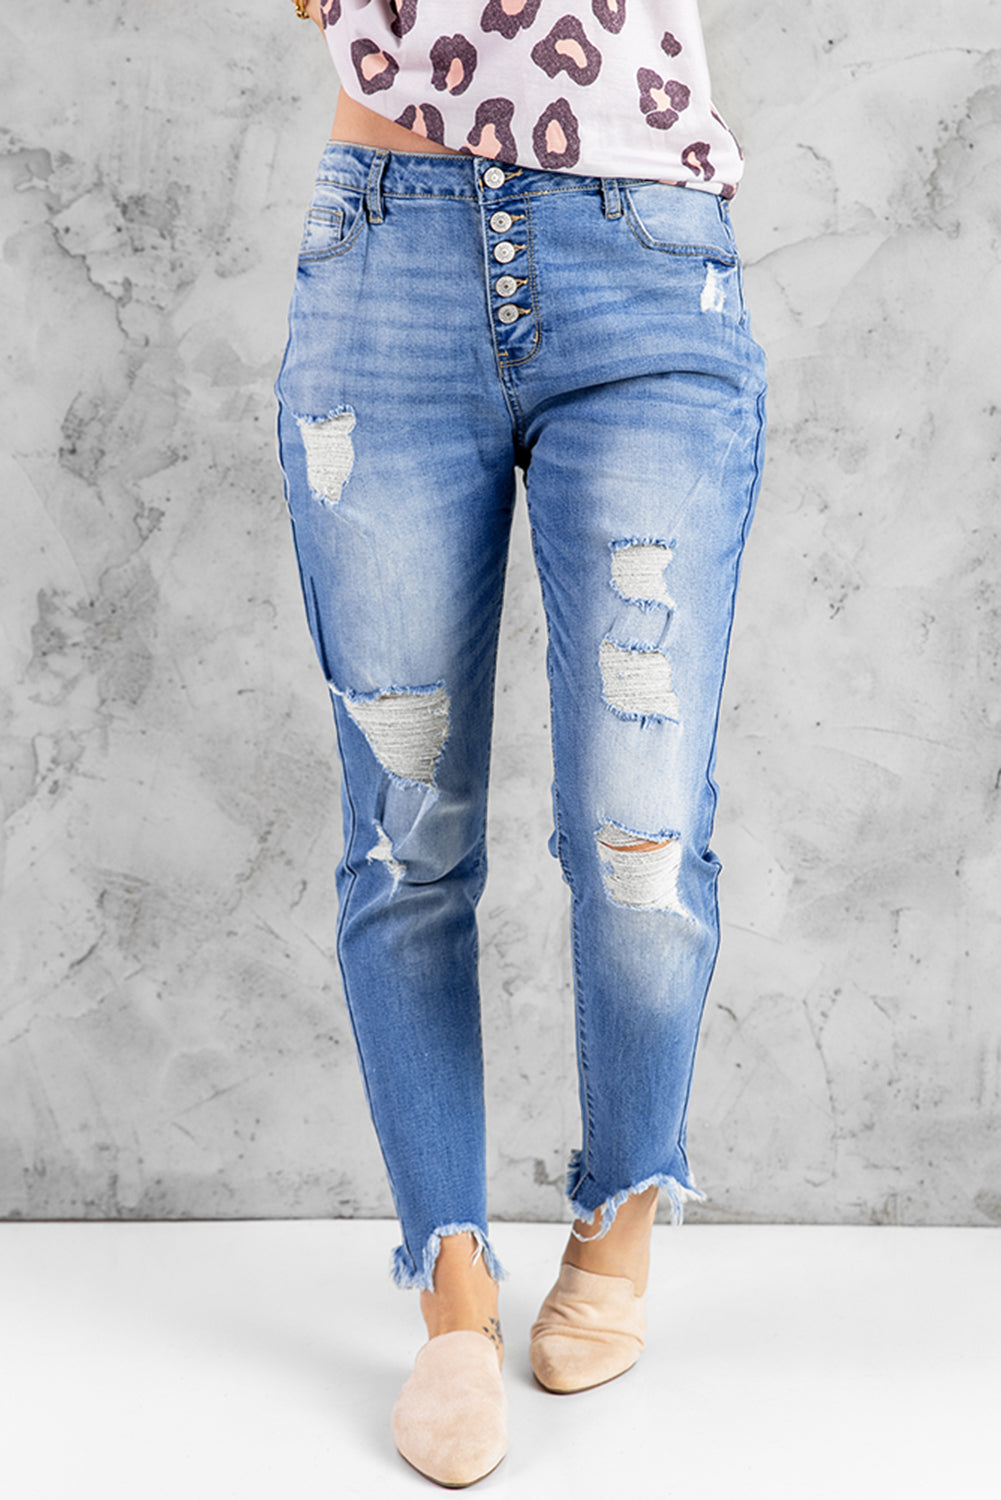 Sky Blue High Rise Button Front Frayed Ankle Skinny Jeans Jeans JT's Designer Fashion